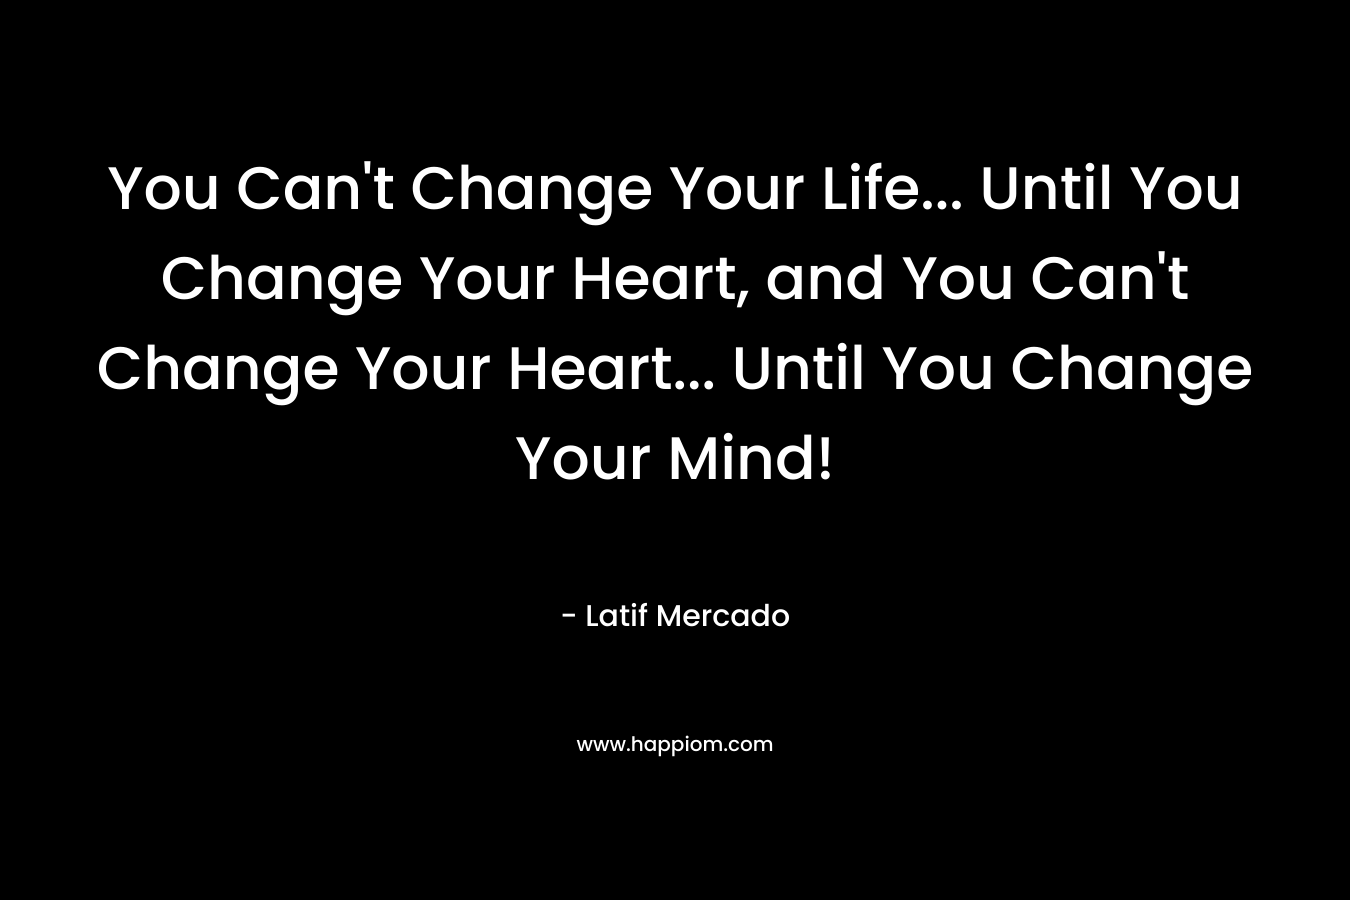 You Can't Change Your Life... Until You Change Your Heart, and You Can't Change Your Heart... Until You Change Your Mind!